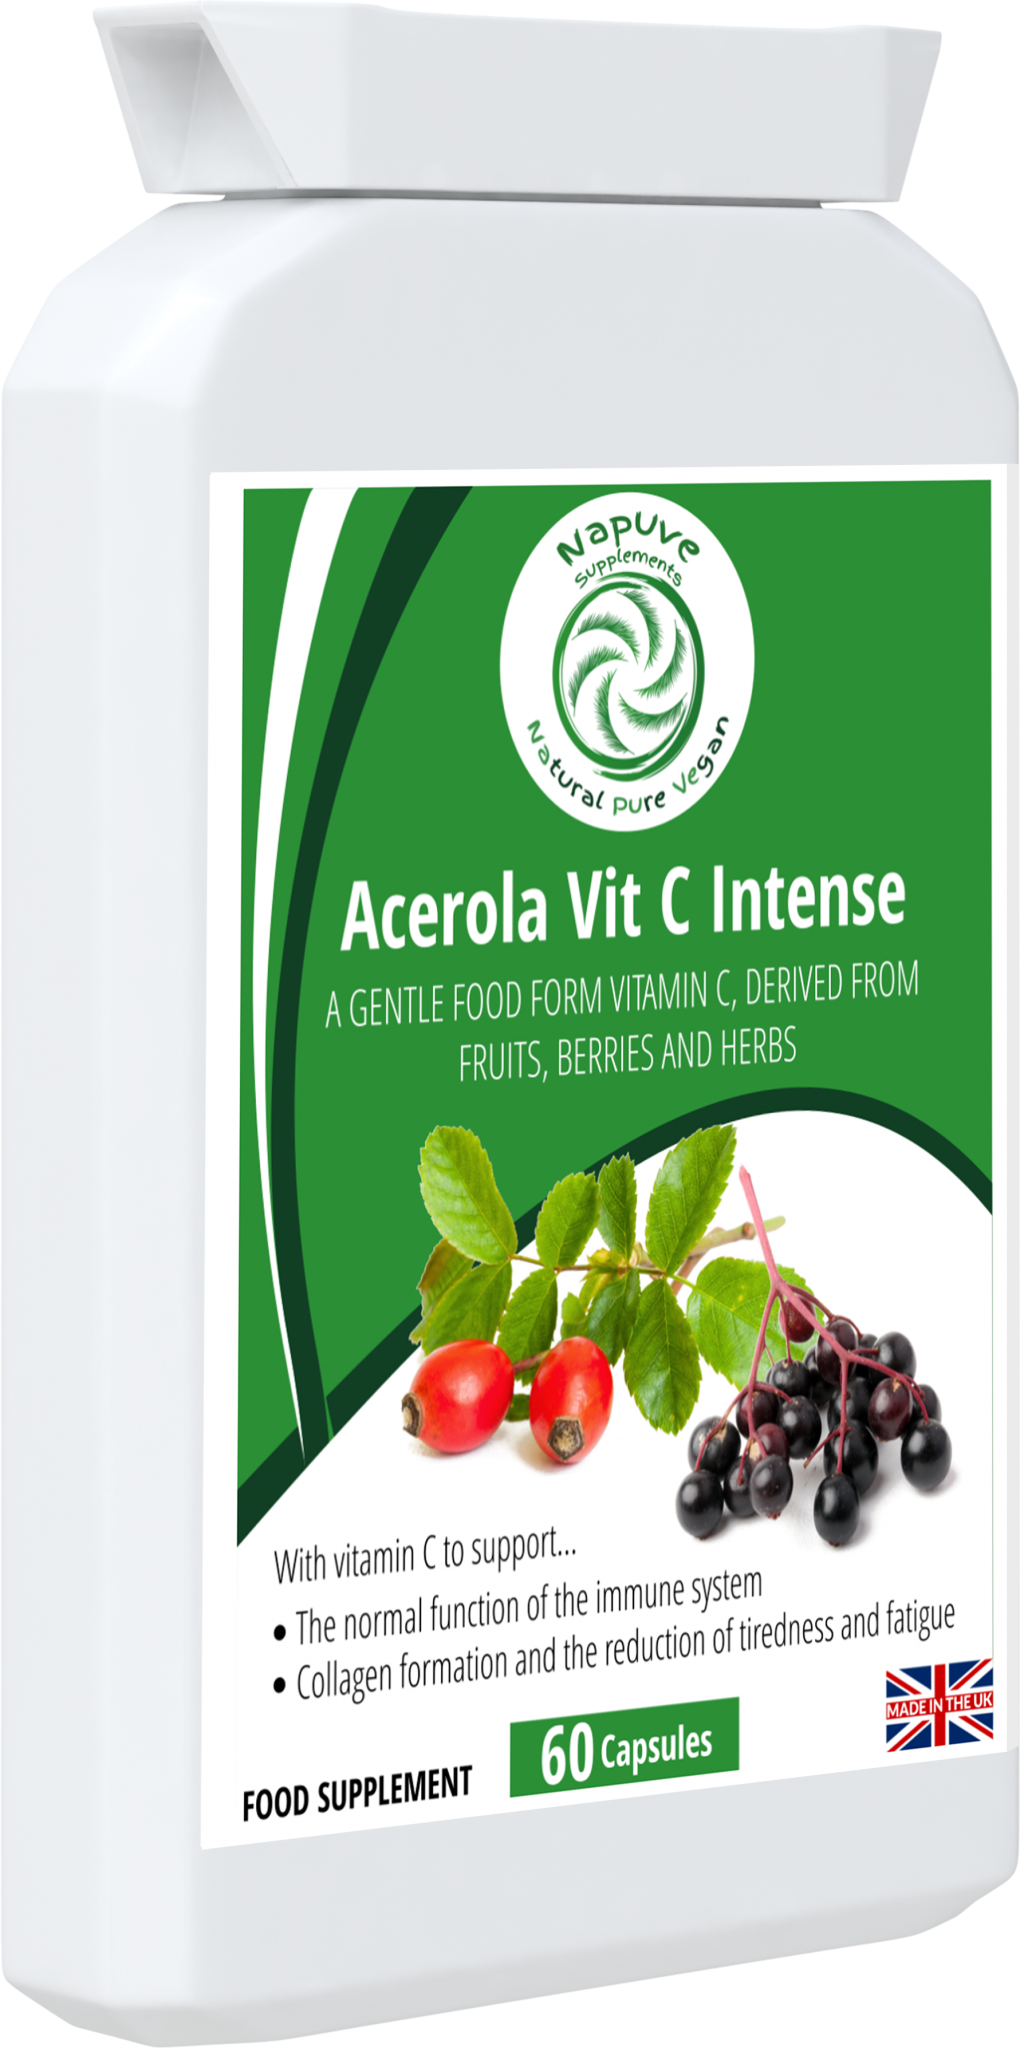 Acerola Vit C Intense - A food form vitamin C supplement from fruits and herbs